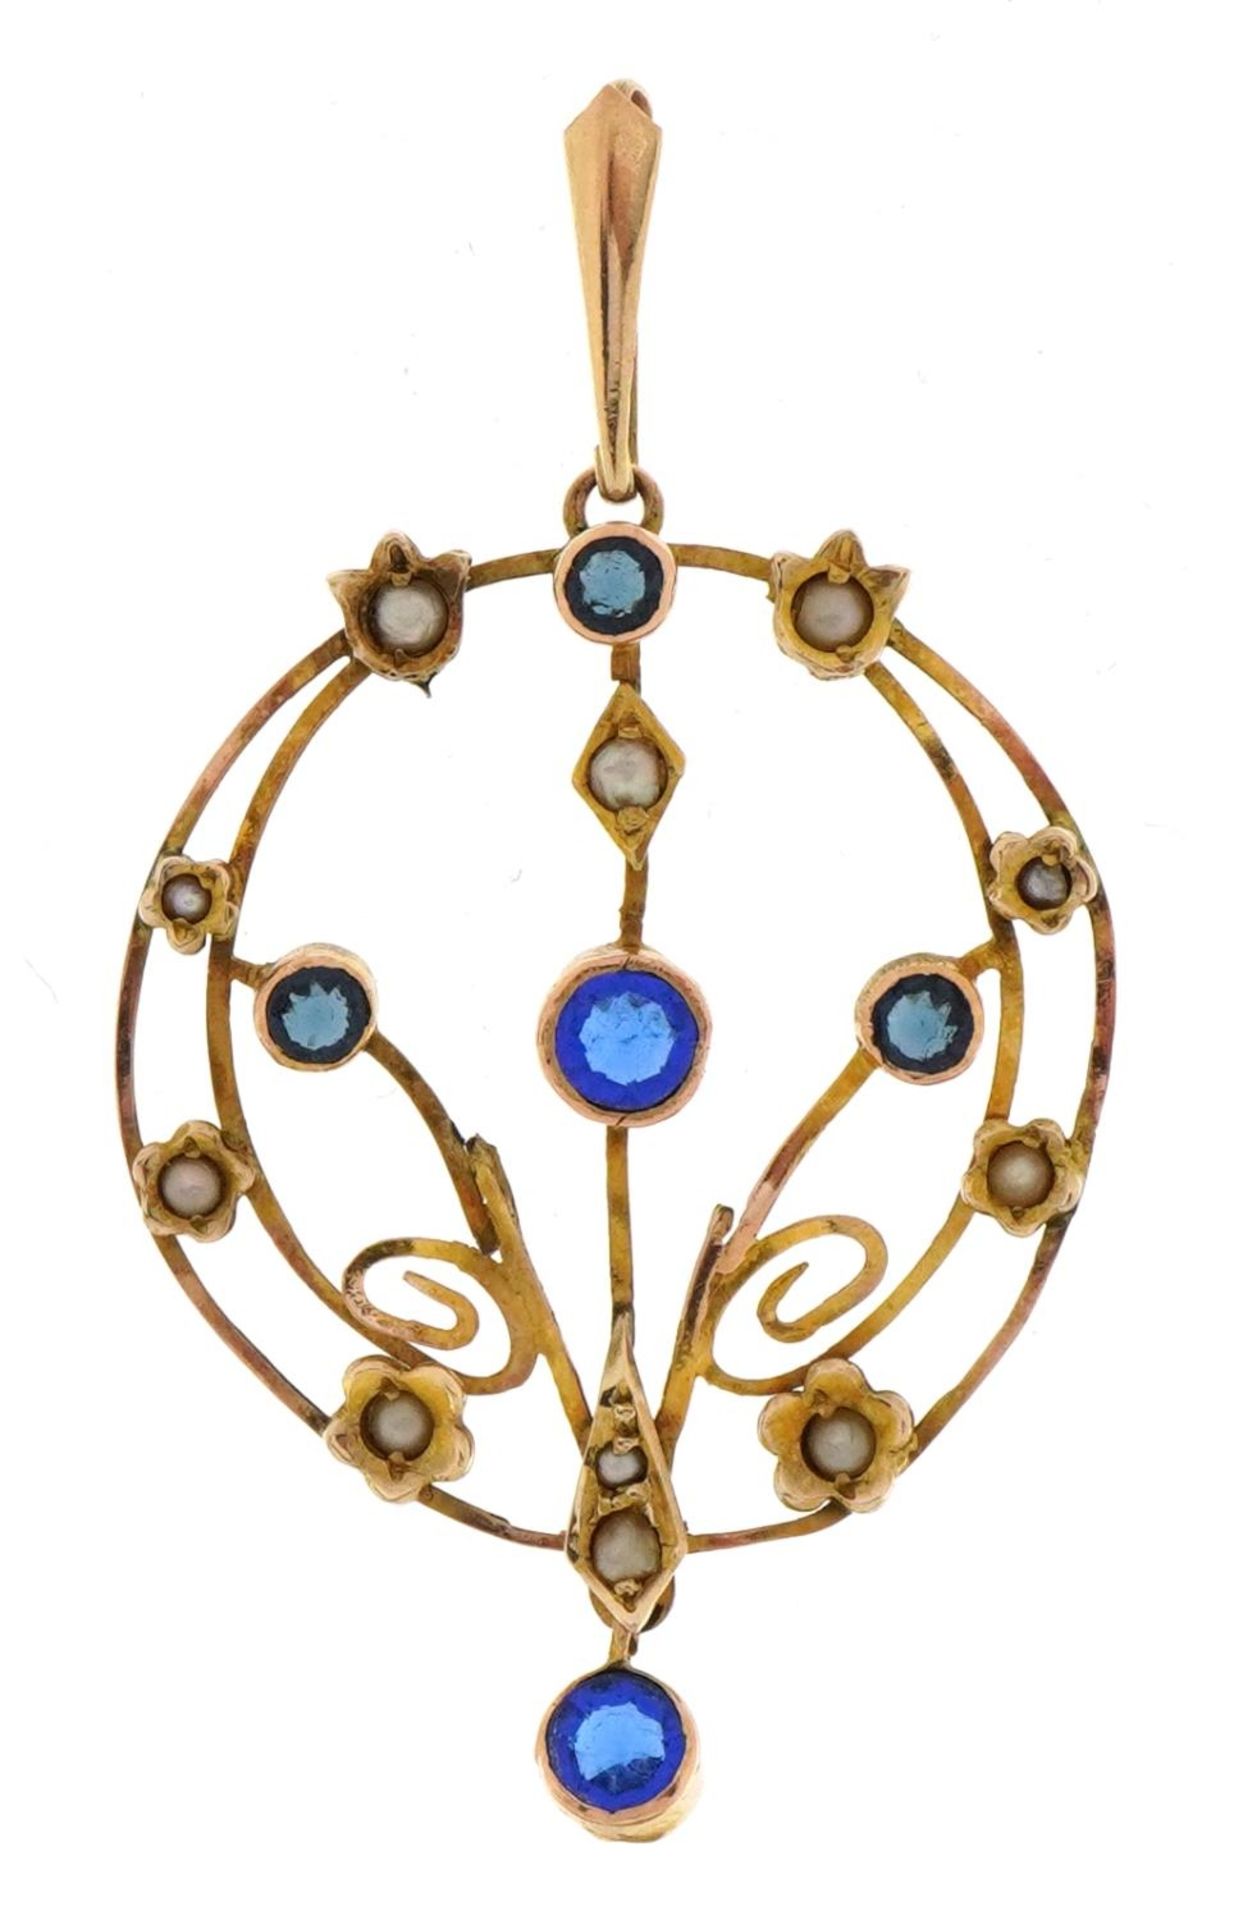 Edwardian unmarked 9ct gold seed pearl and blue stone drop pendant, 5.0cm high, 2.3g